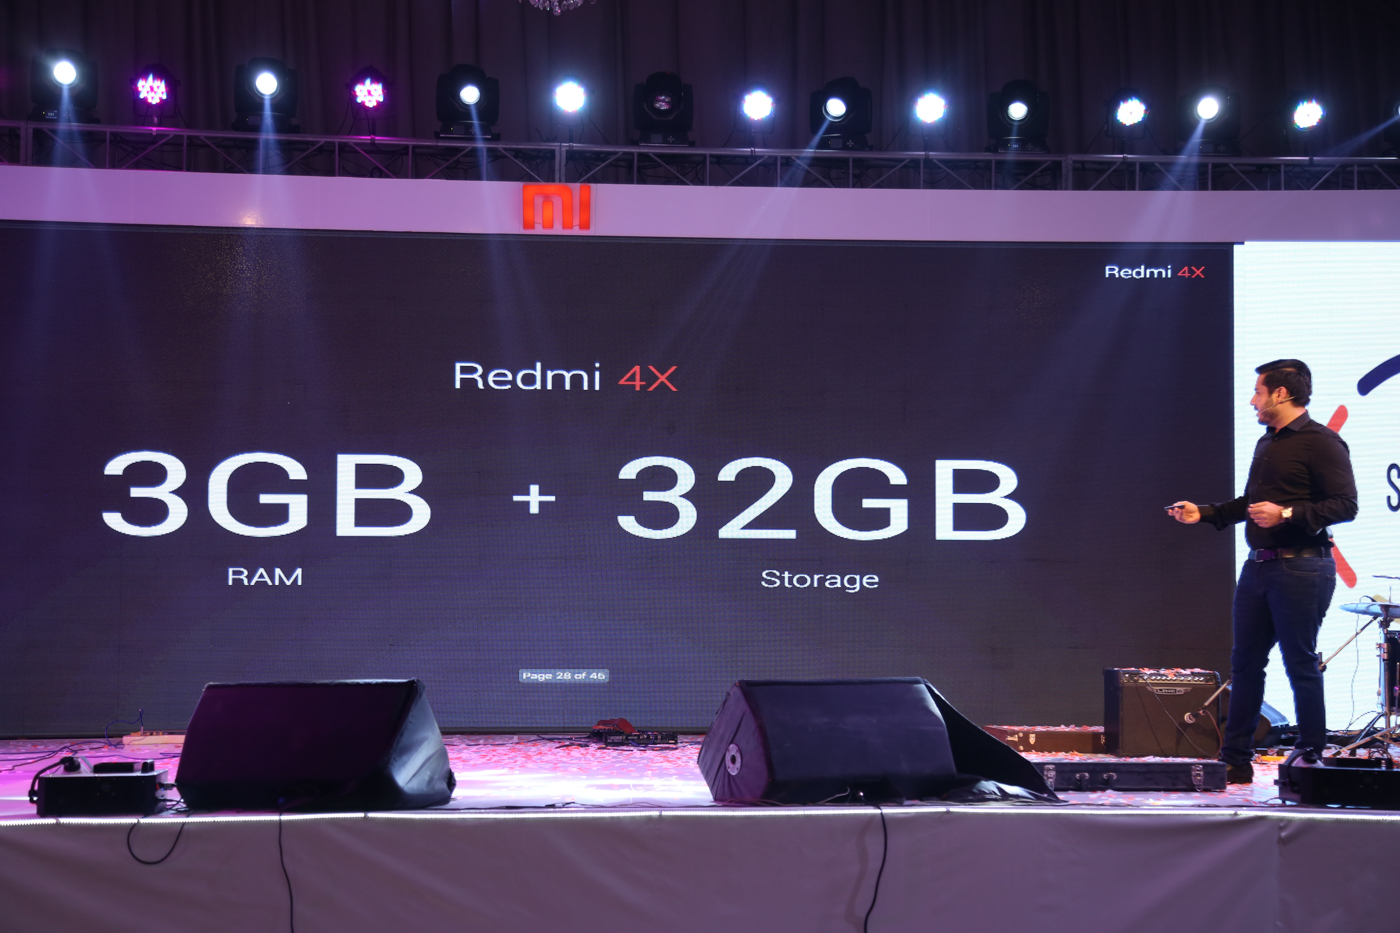 Ahmed-Butt-Launch Of Redmi 4X in Pakistan- Event by Mooroo & SmarLink Technologies